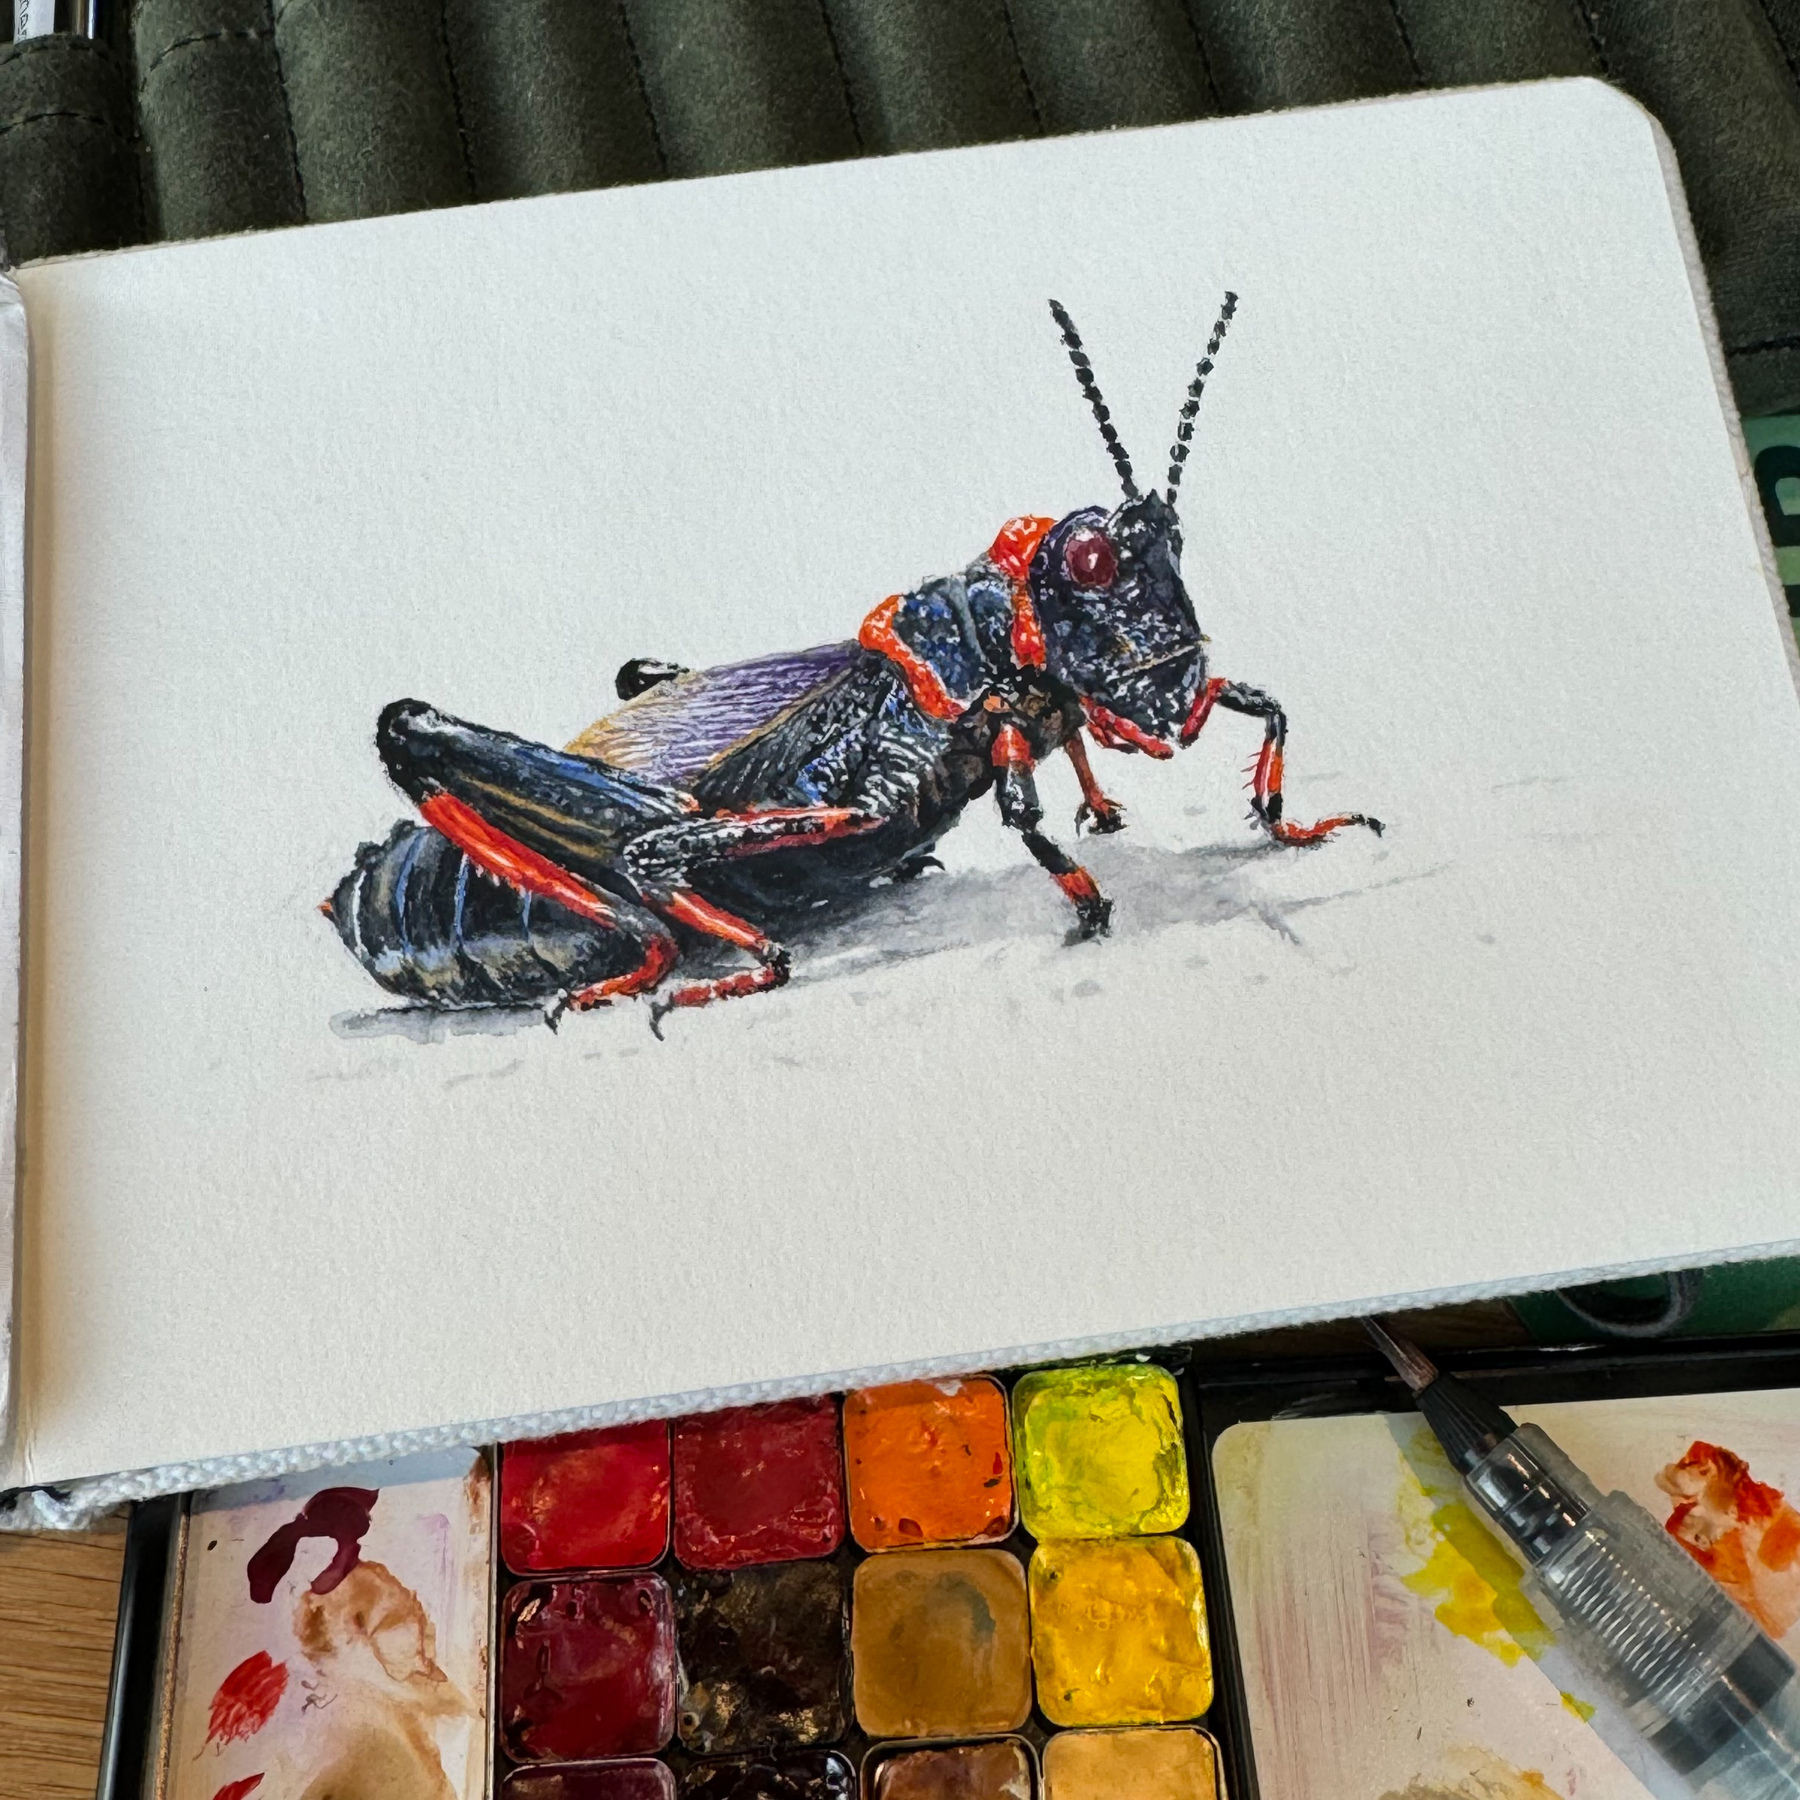 This image features an artist's workspace with a focus on a beautifully detailed painting of a grasshopper on a small white textured paper. Above the artwork, a set of fine-tip pens in a stand is visible, indicating the precision tools used for the painting. To the bottom left, an open watercolor palette is shown, filled with a variety of vibrant colors, some mixed and well-used. Beside the palette lies a water brush pen, suggesting a mix of watercolor and ink techniques in the creation of the artwork. The overall setting suggests a blend of meticulous detail and artistic spontaneity.